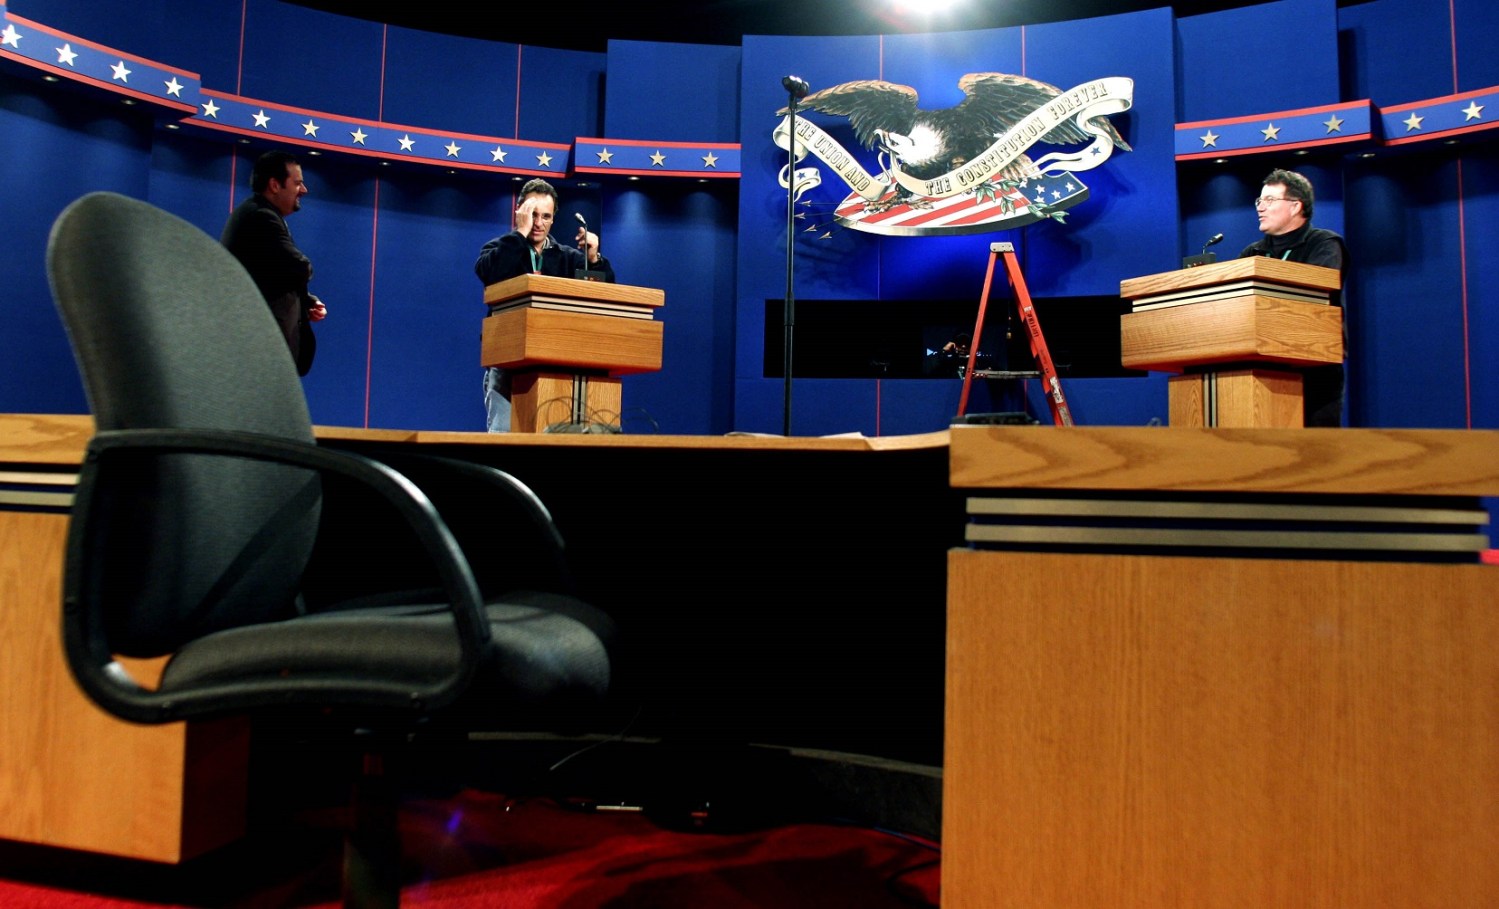 Seven rules for presidential debates drawn from history | Brookings